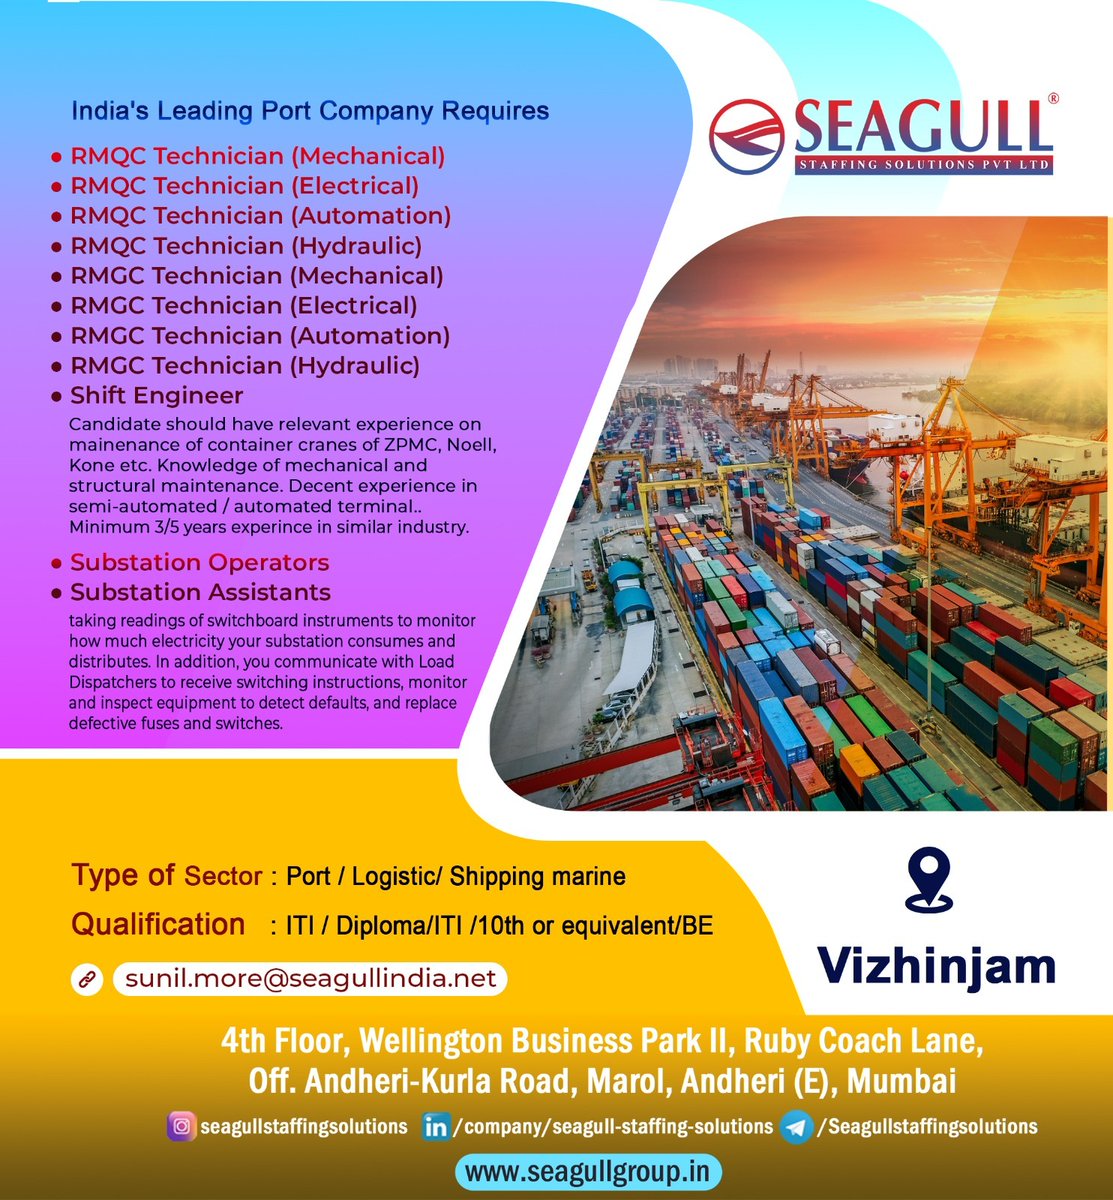 VIZHINJAM JOB OPENING 2023
Interested candidate share Cv on Below Artwork address.
#portjob #portmanagment #portandlogistic #qcjobs #qcengineer #qcelectrical #qcmechanical #qchydraulic #automationsystems #helper #CRMG #freejobs #freeadvertising #indiajobs #shippingindustry